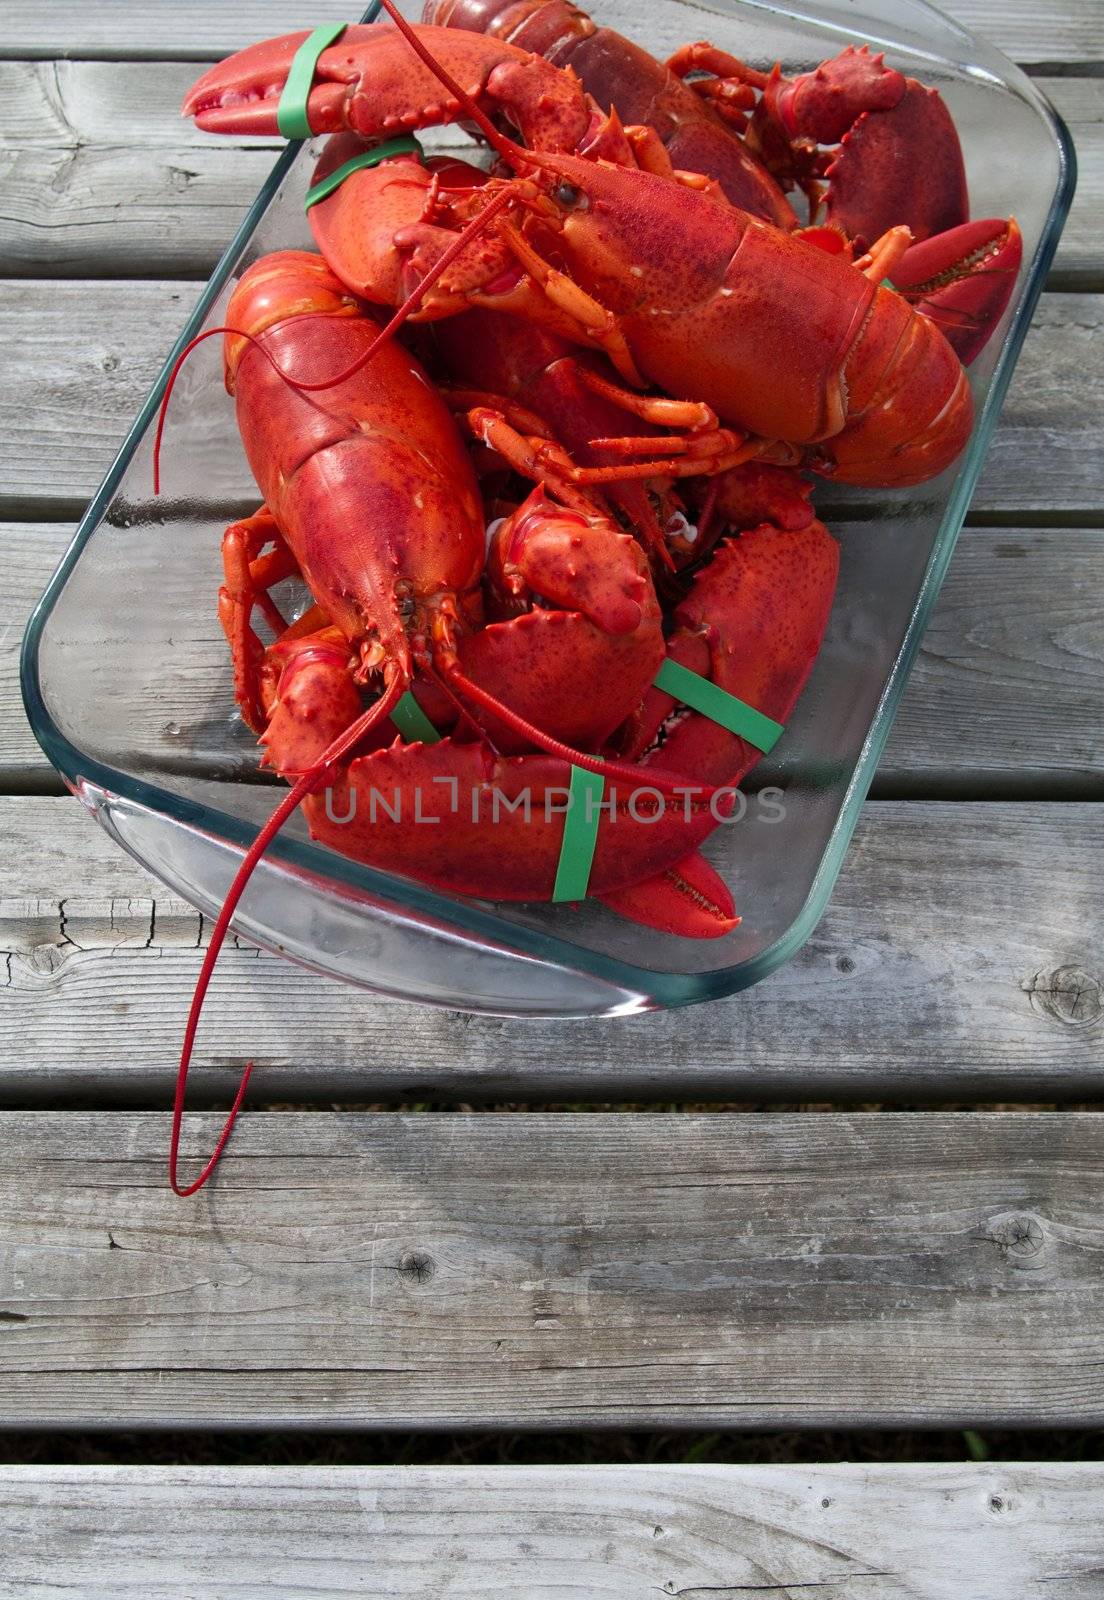 Lobster just cooked and ready to eat